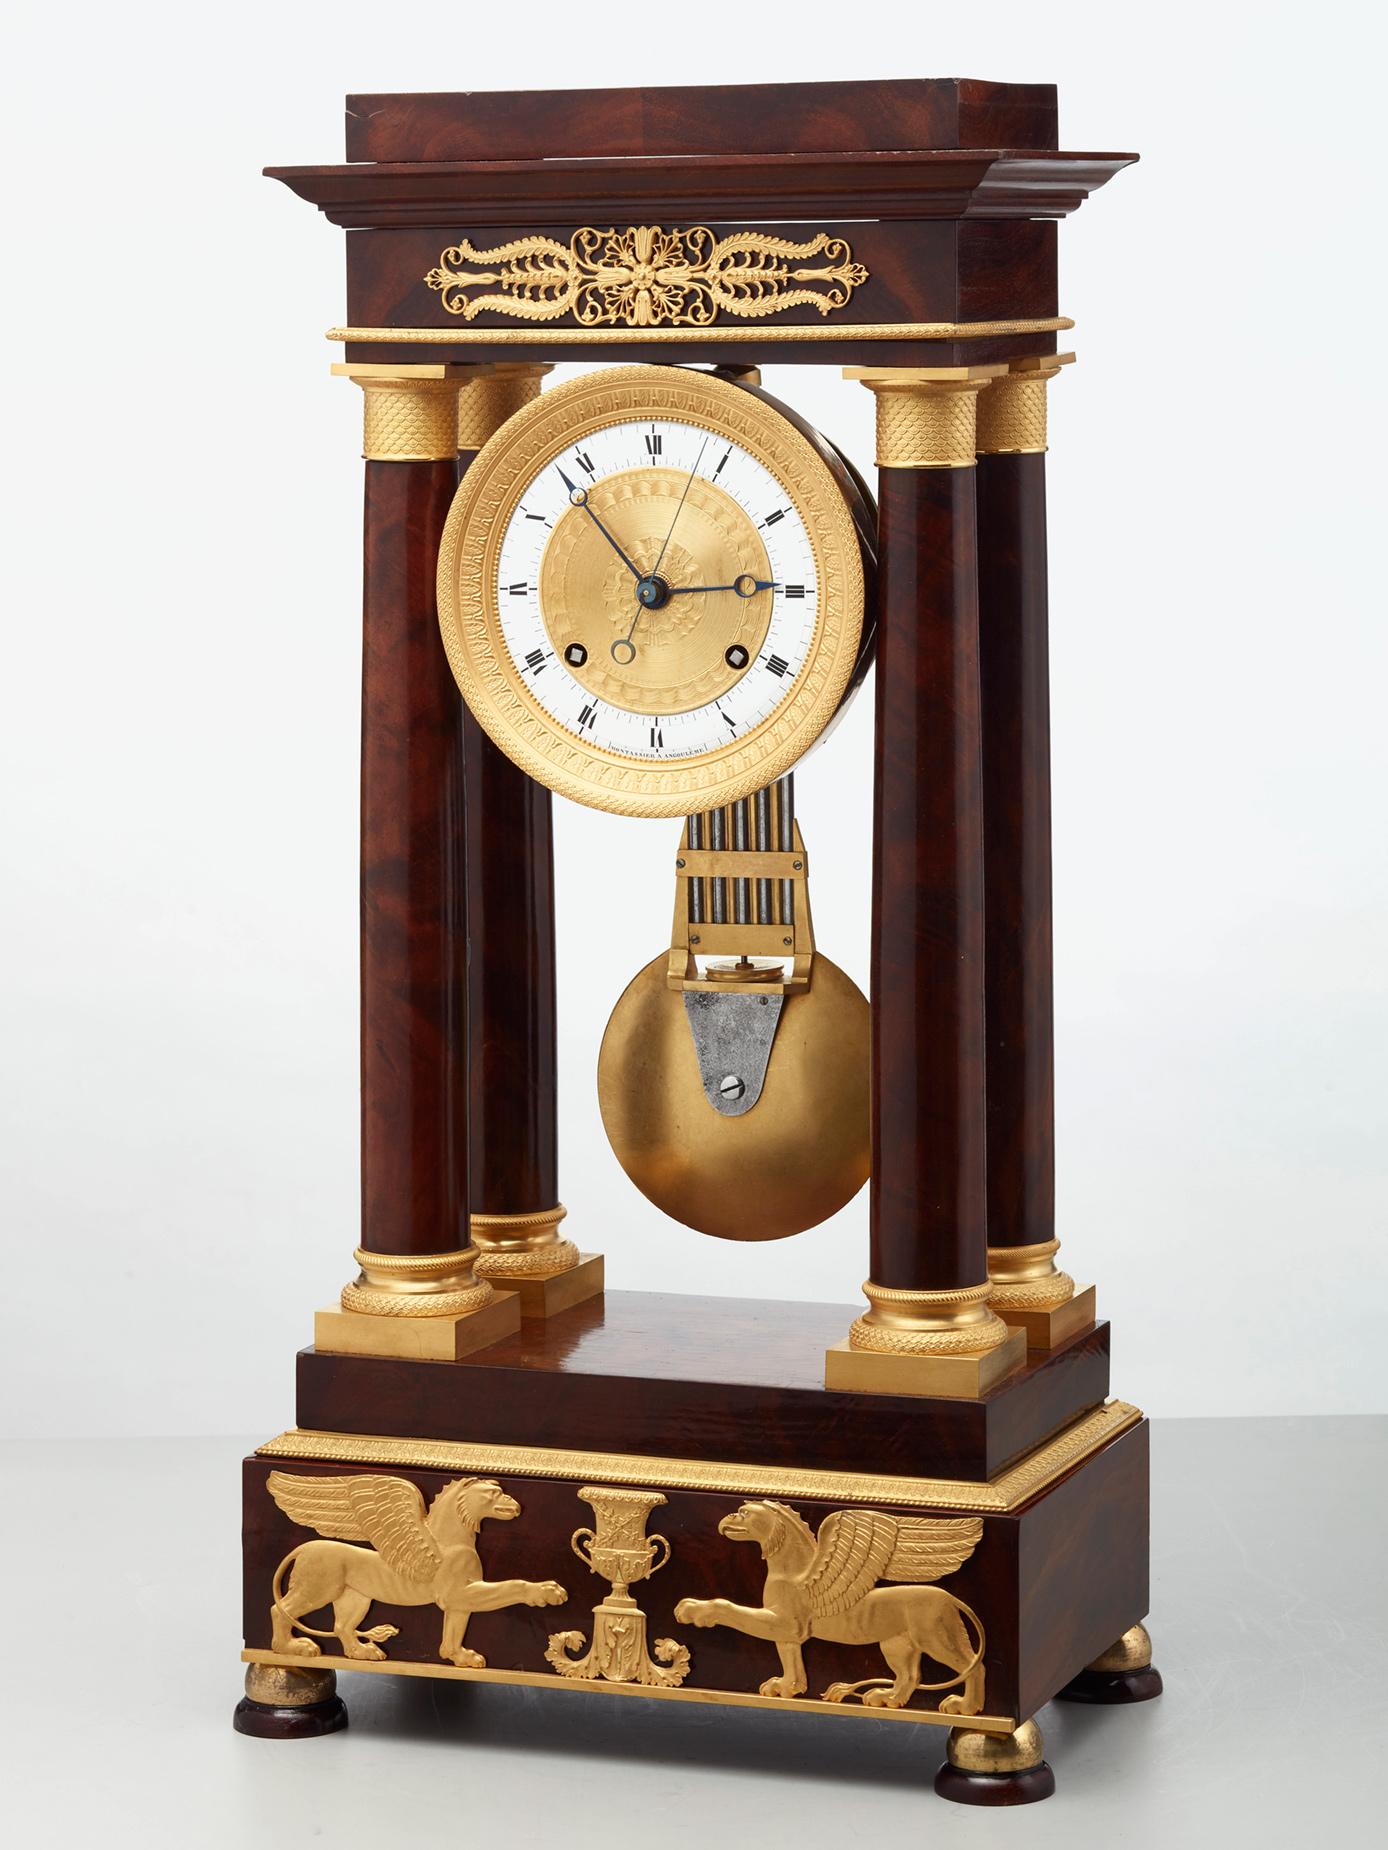 The clock movement is suspended from a portico within four pillars. The mahogany case is decorated with extremely beautiful cast and gilded bronzes, including two griffons facing an urn of victory. The clock is mounted on four beautiful bun feet.